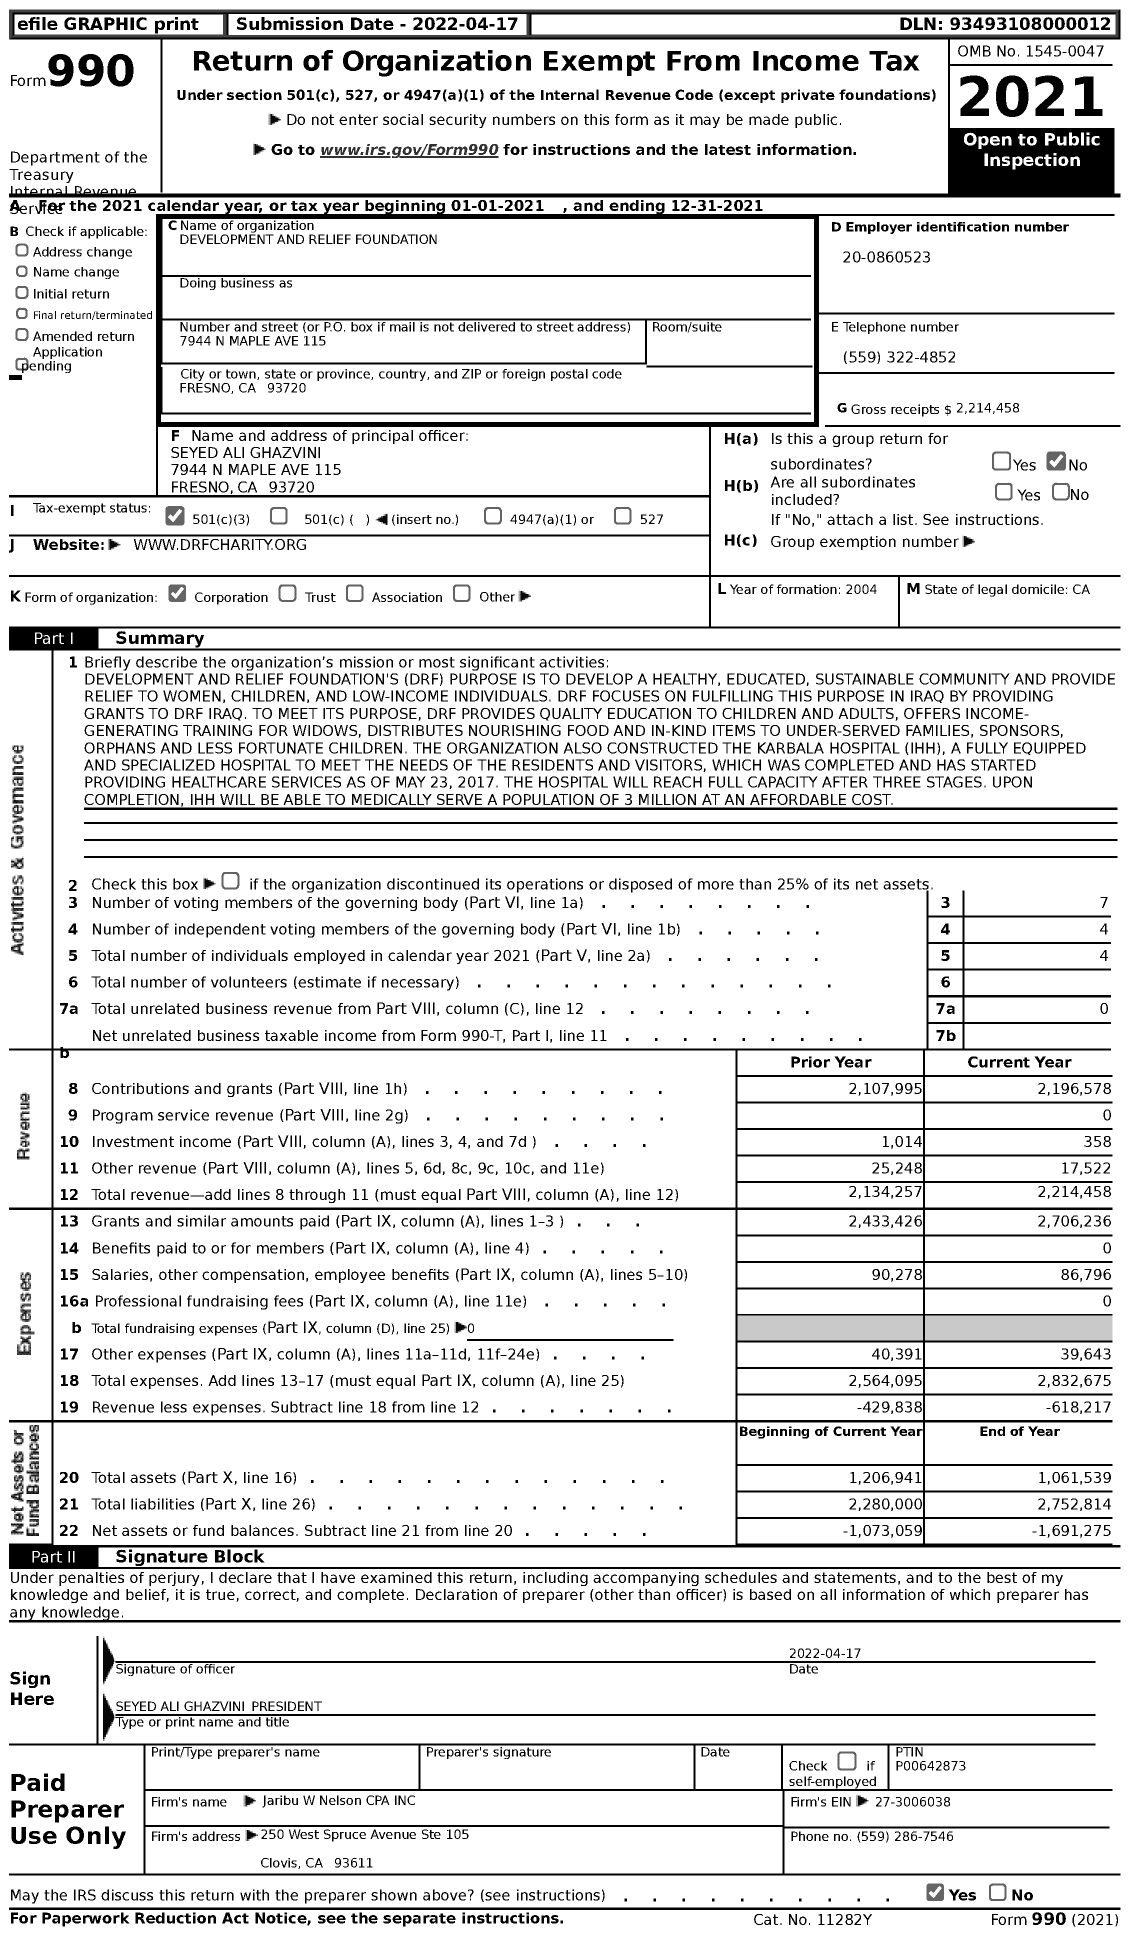 Image of first page of 2021 Form 990 for ATTN: Seyed Ali Ghazvini (DRF)